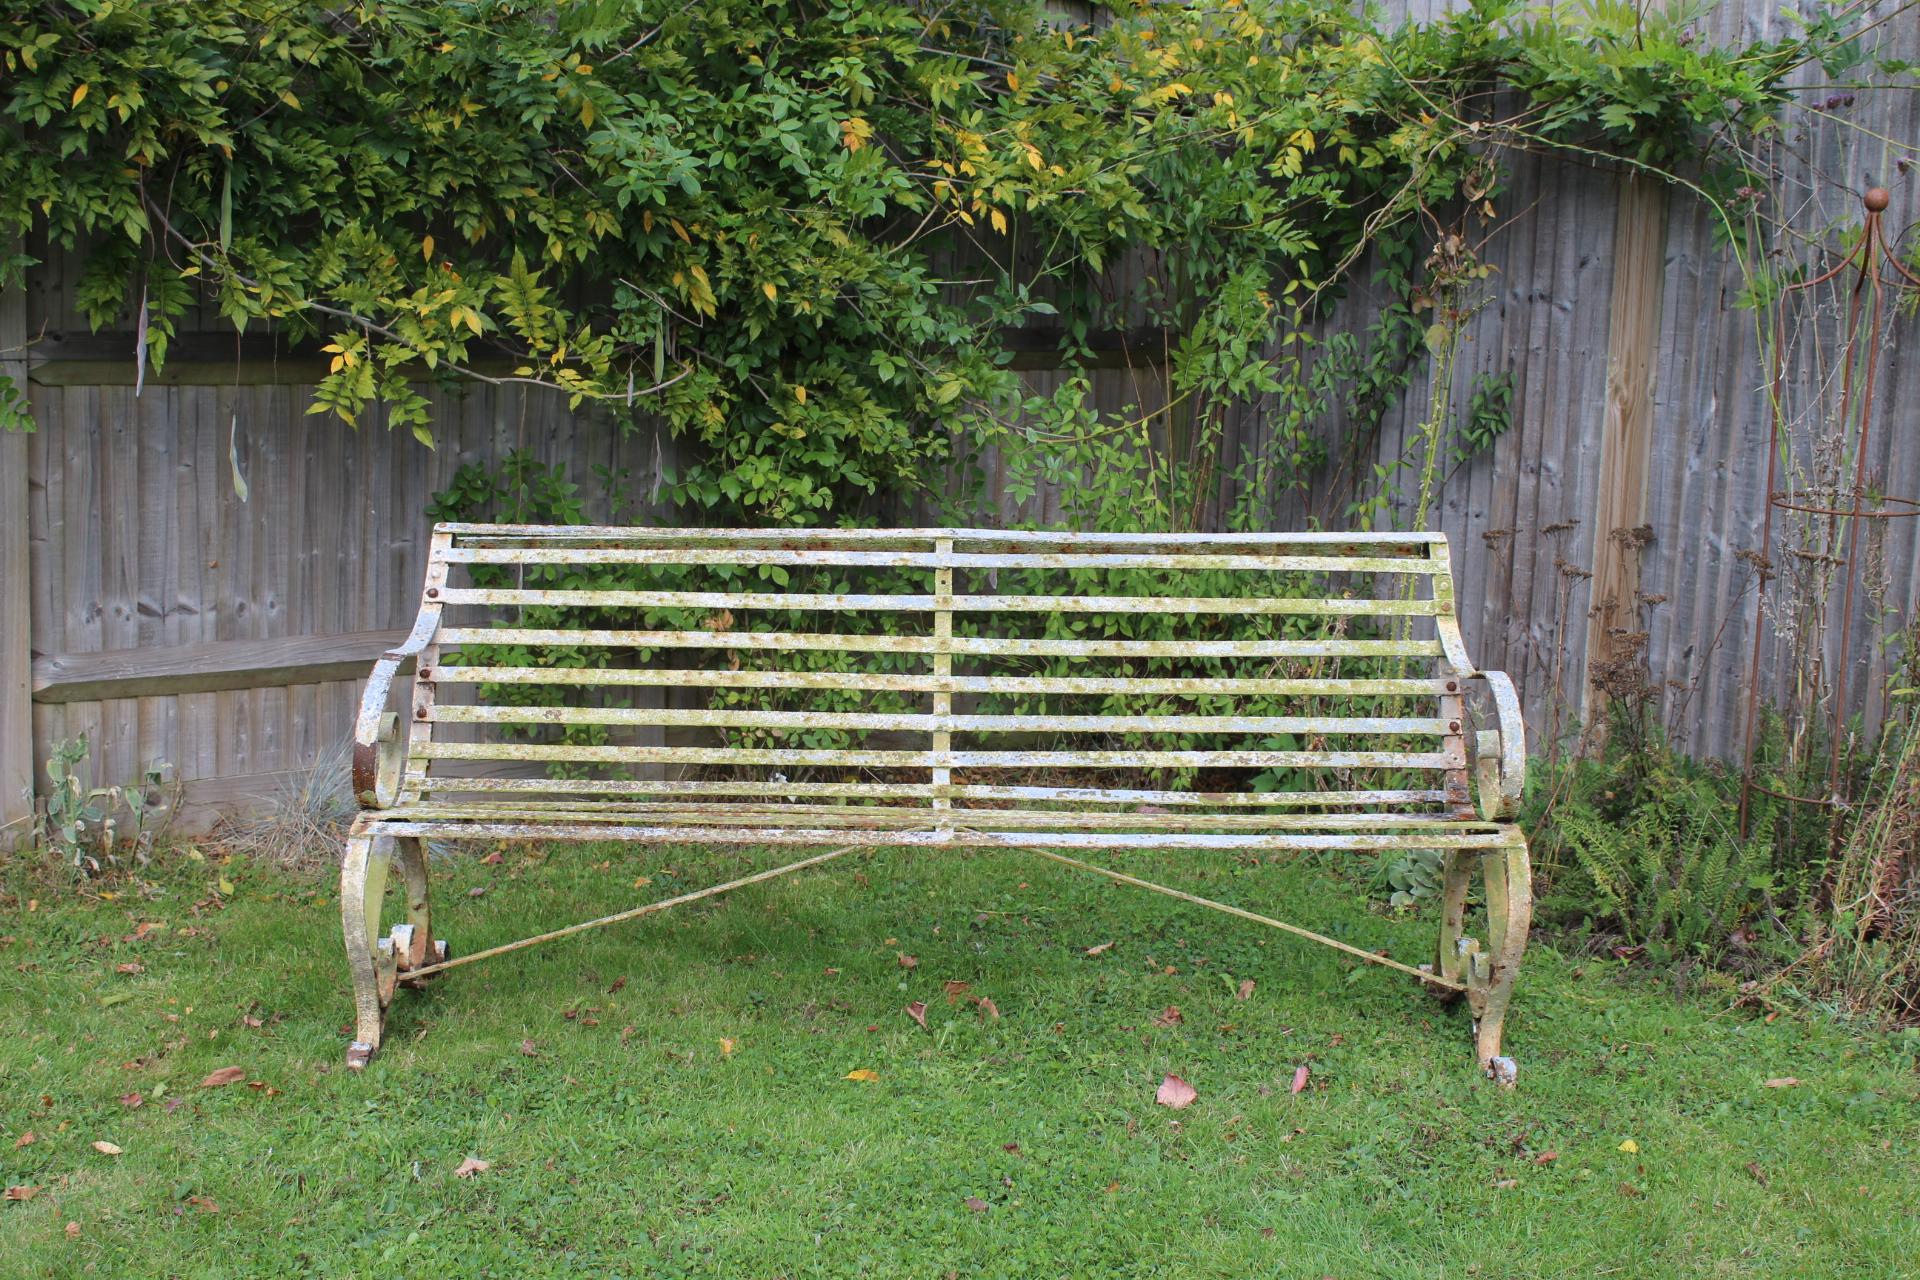 A Regency garden seat of excellent proportions made from wrought or also known as strap iron, the back has a graceful sloping shape with the scroll arms with a rare double scroll in between each of the end legs, these are rare to find like this and